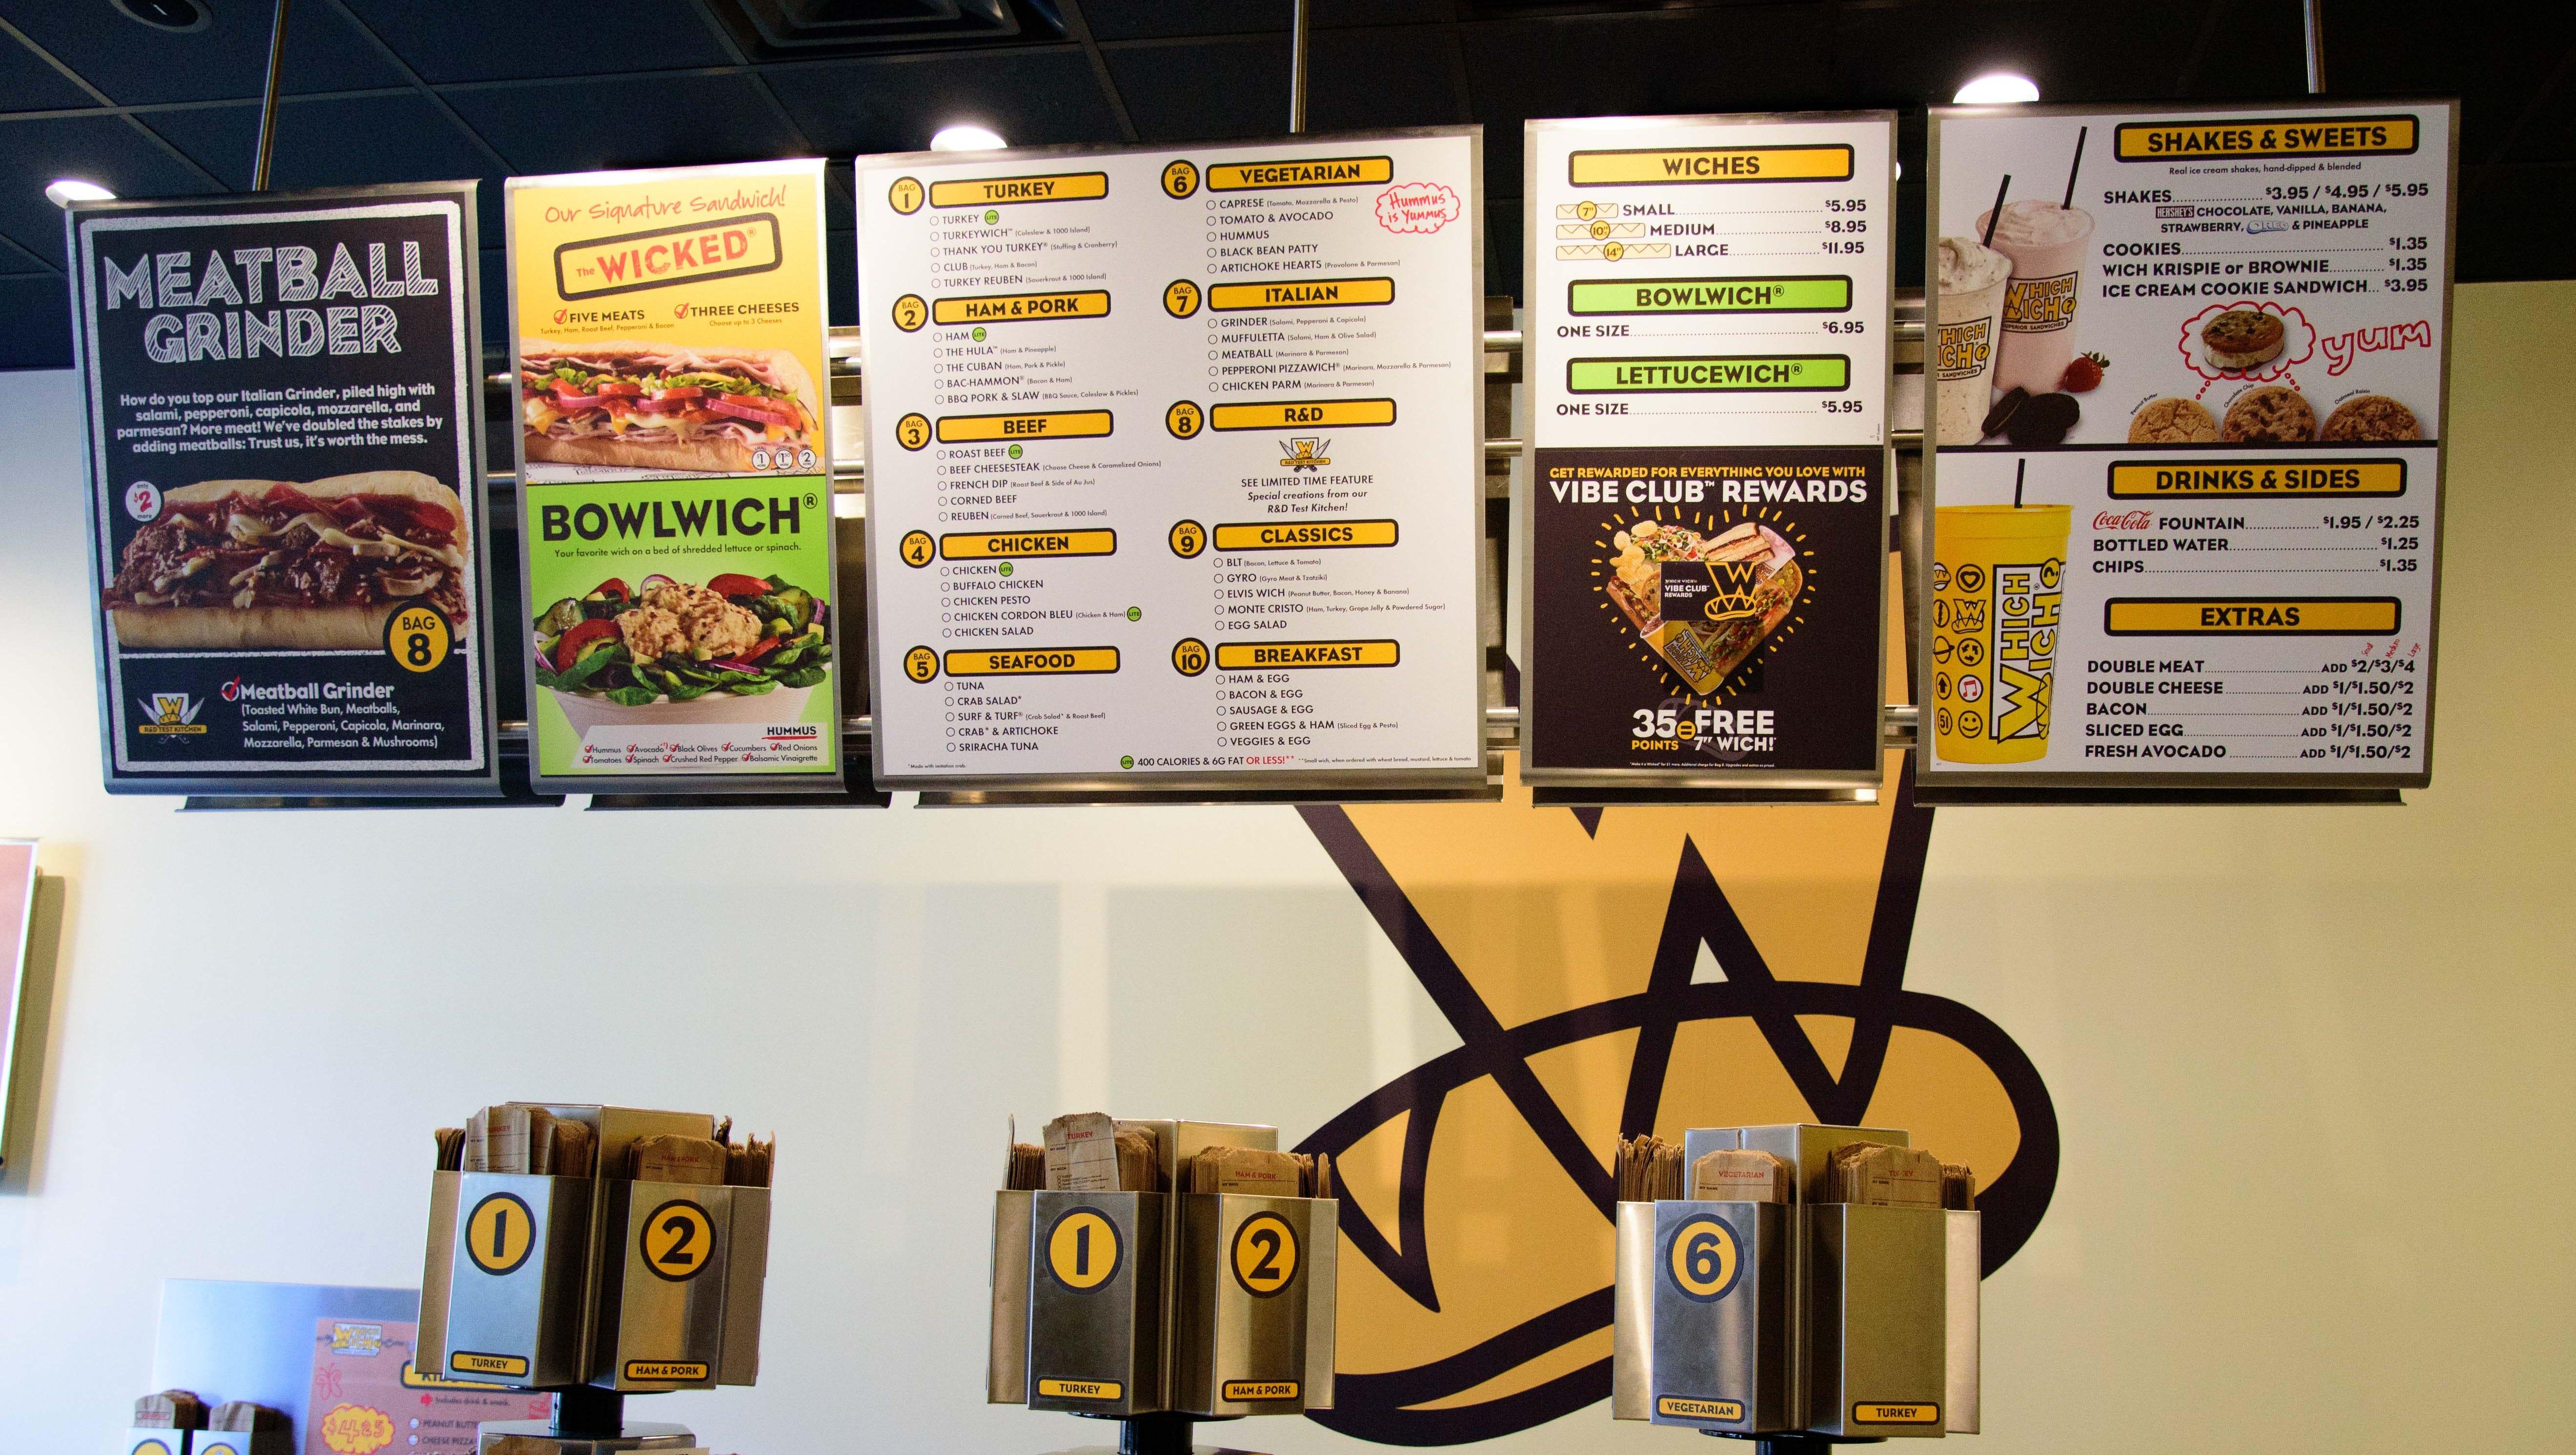 Which Wich prides itself on customization has a unique ordering system that gives customers plenty of options to choose from.